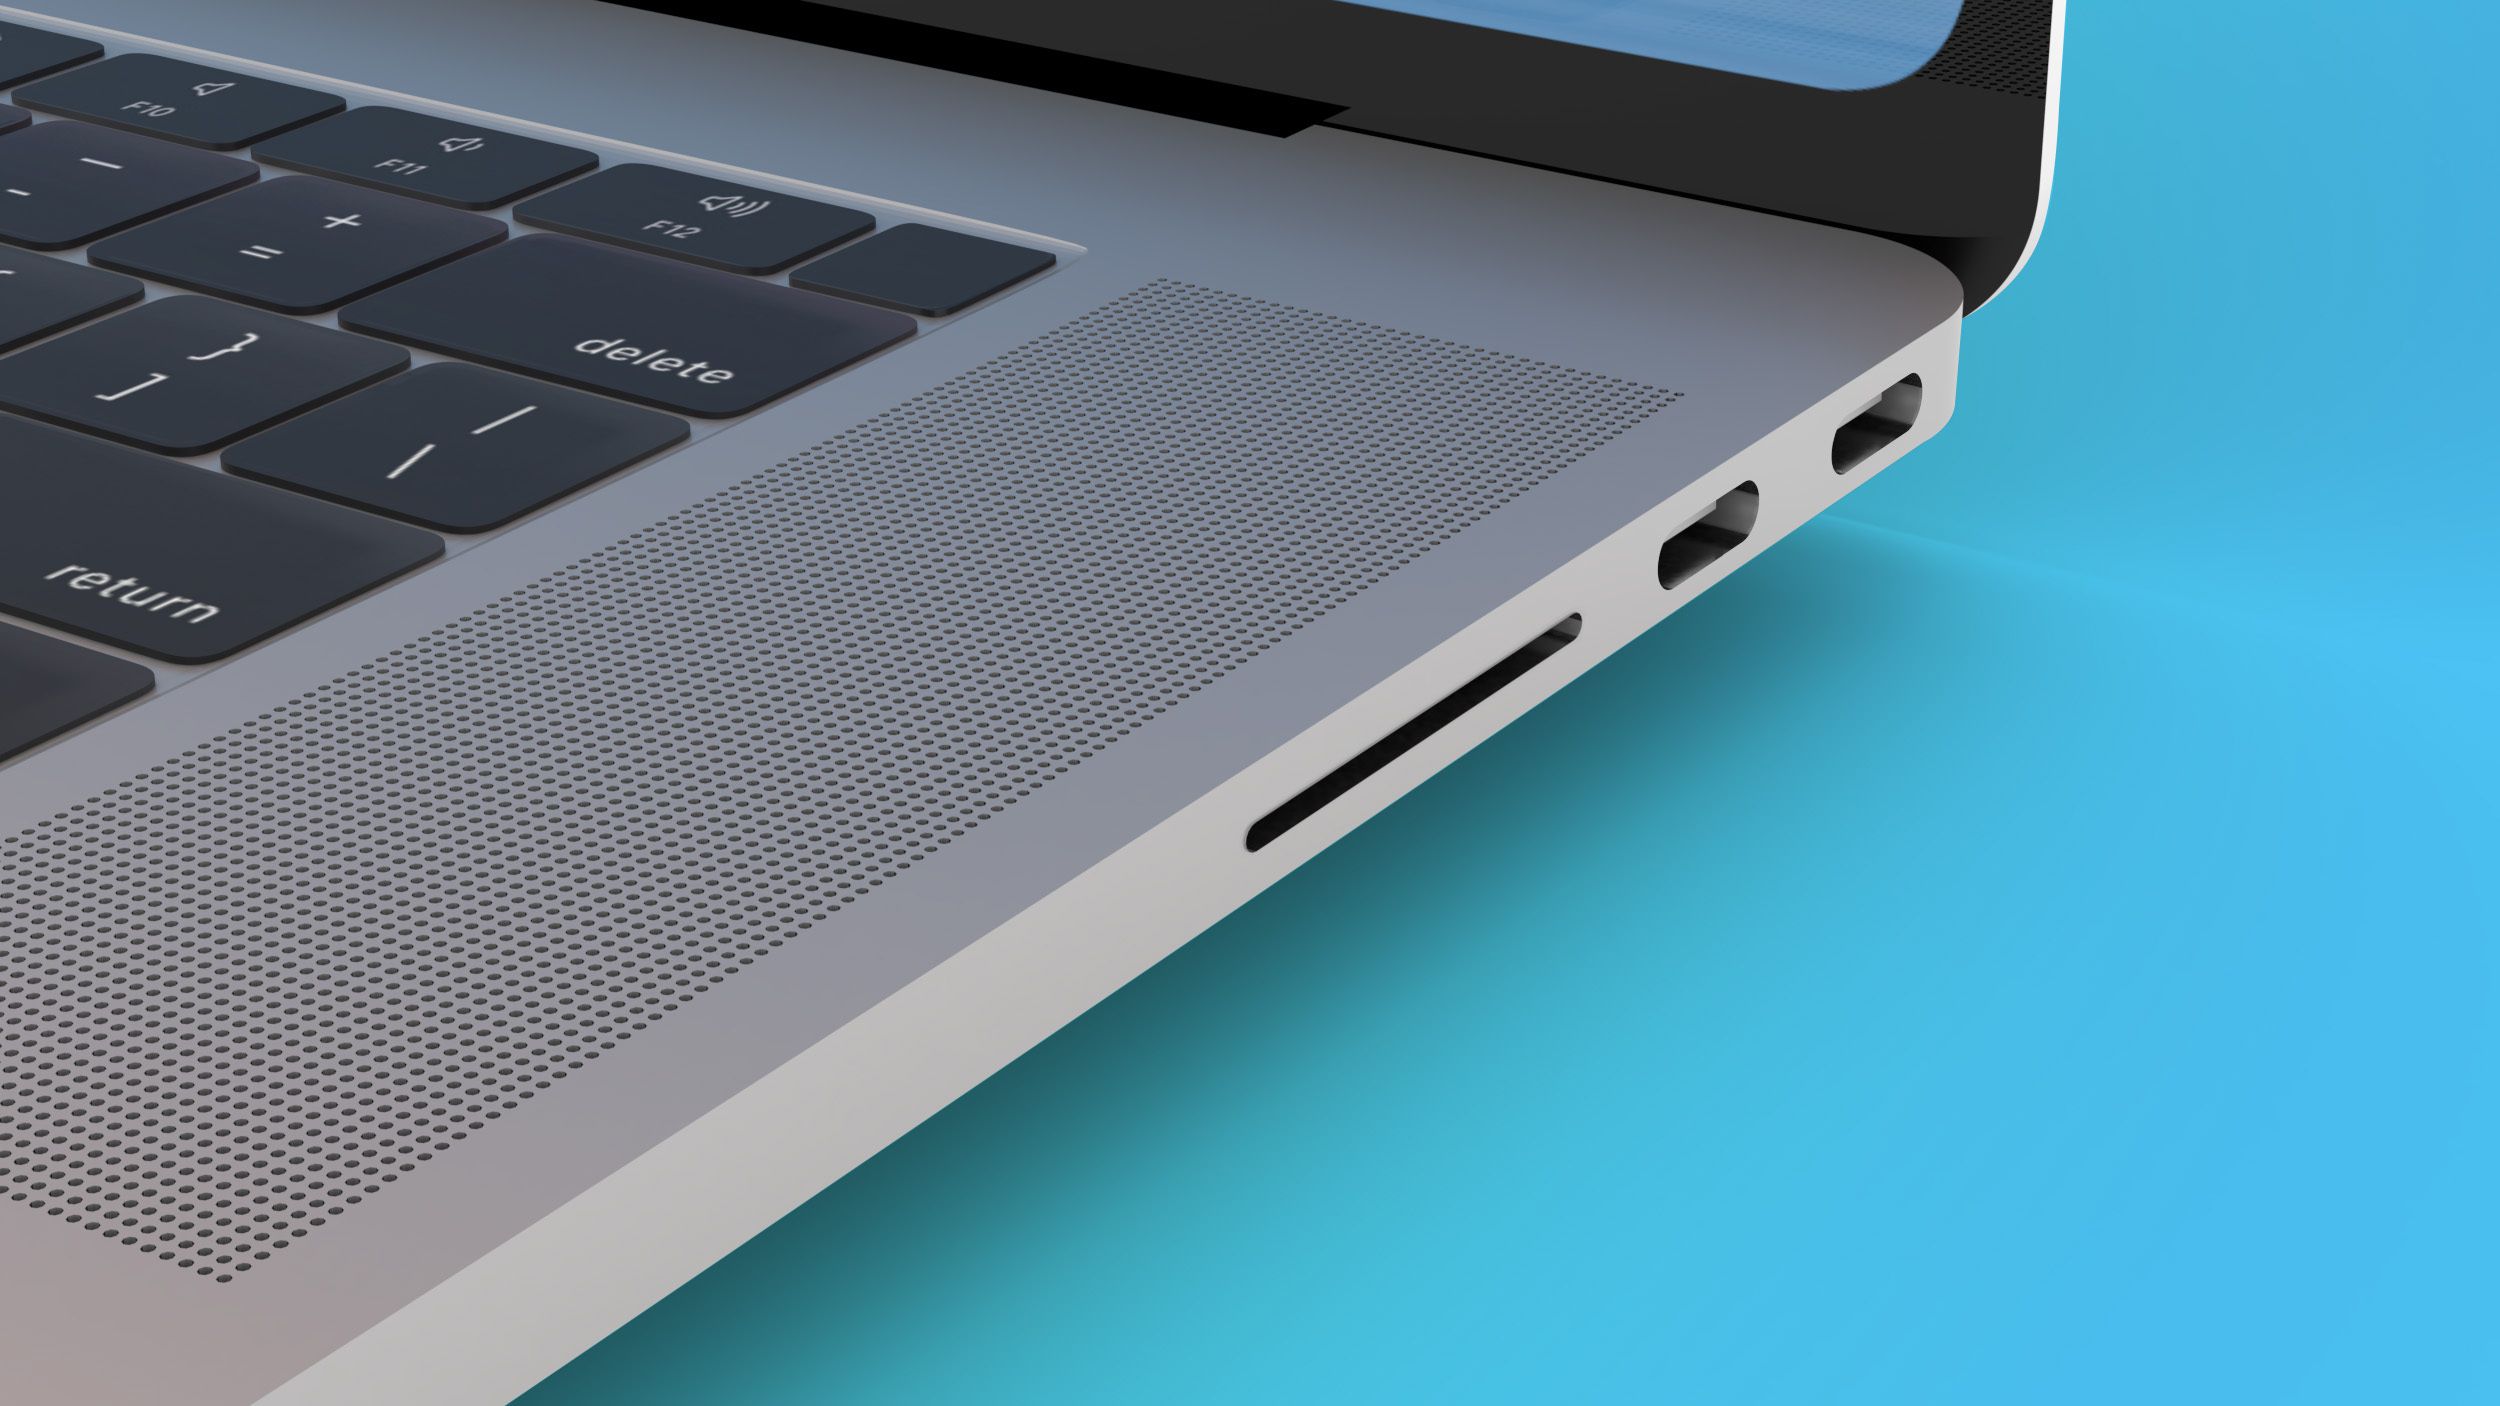 Bloomberg: next MacBook Pro with SD card reader